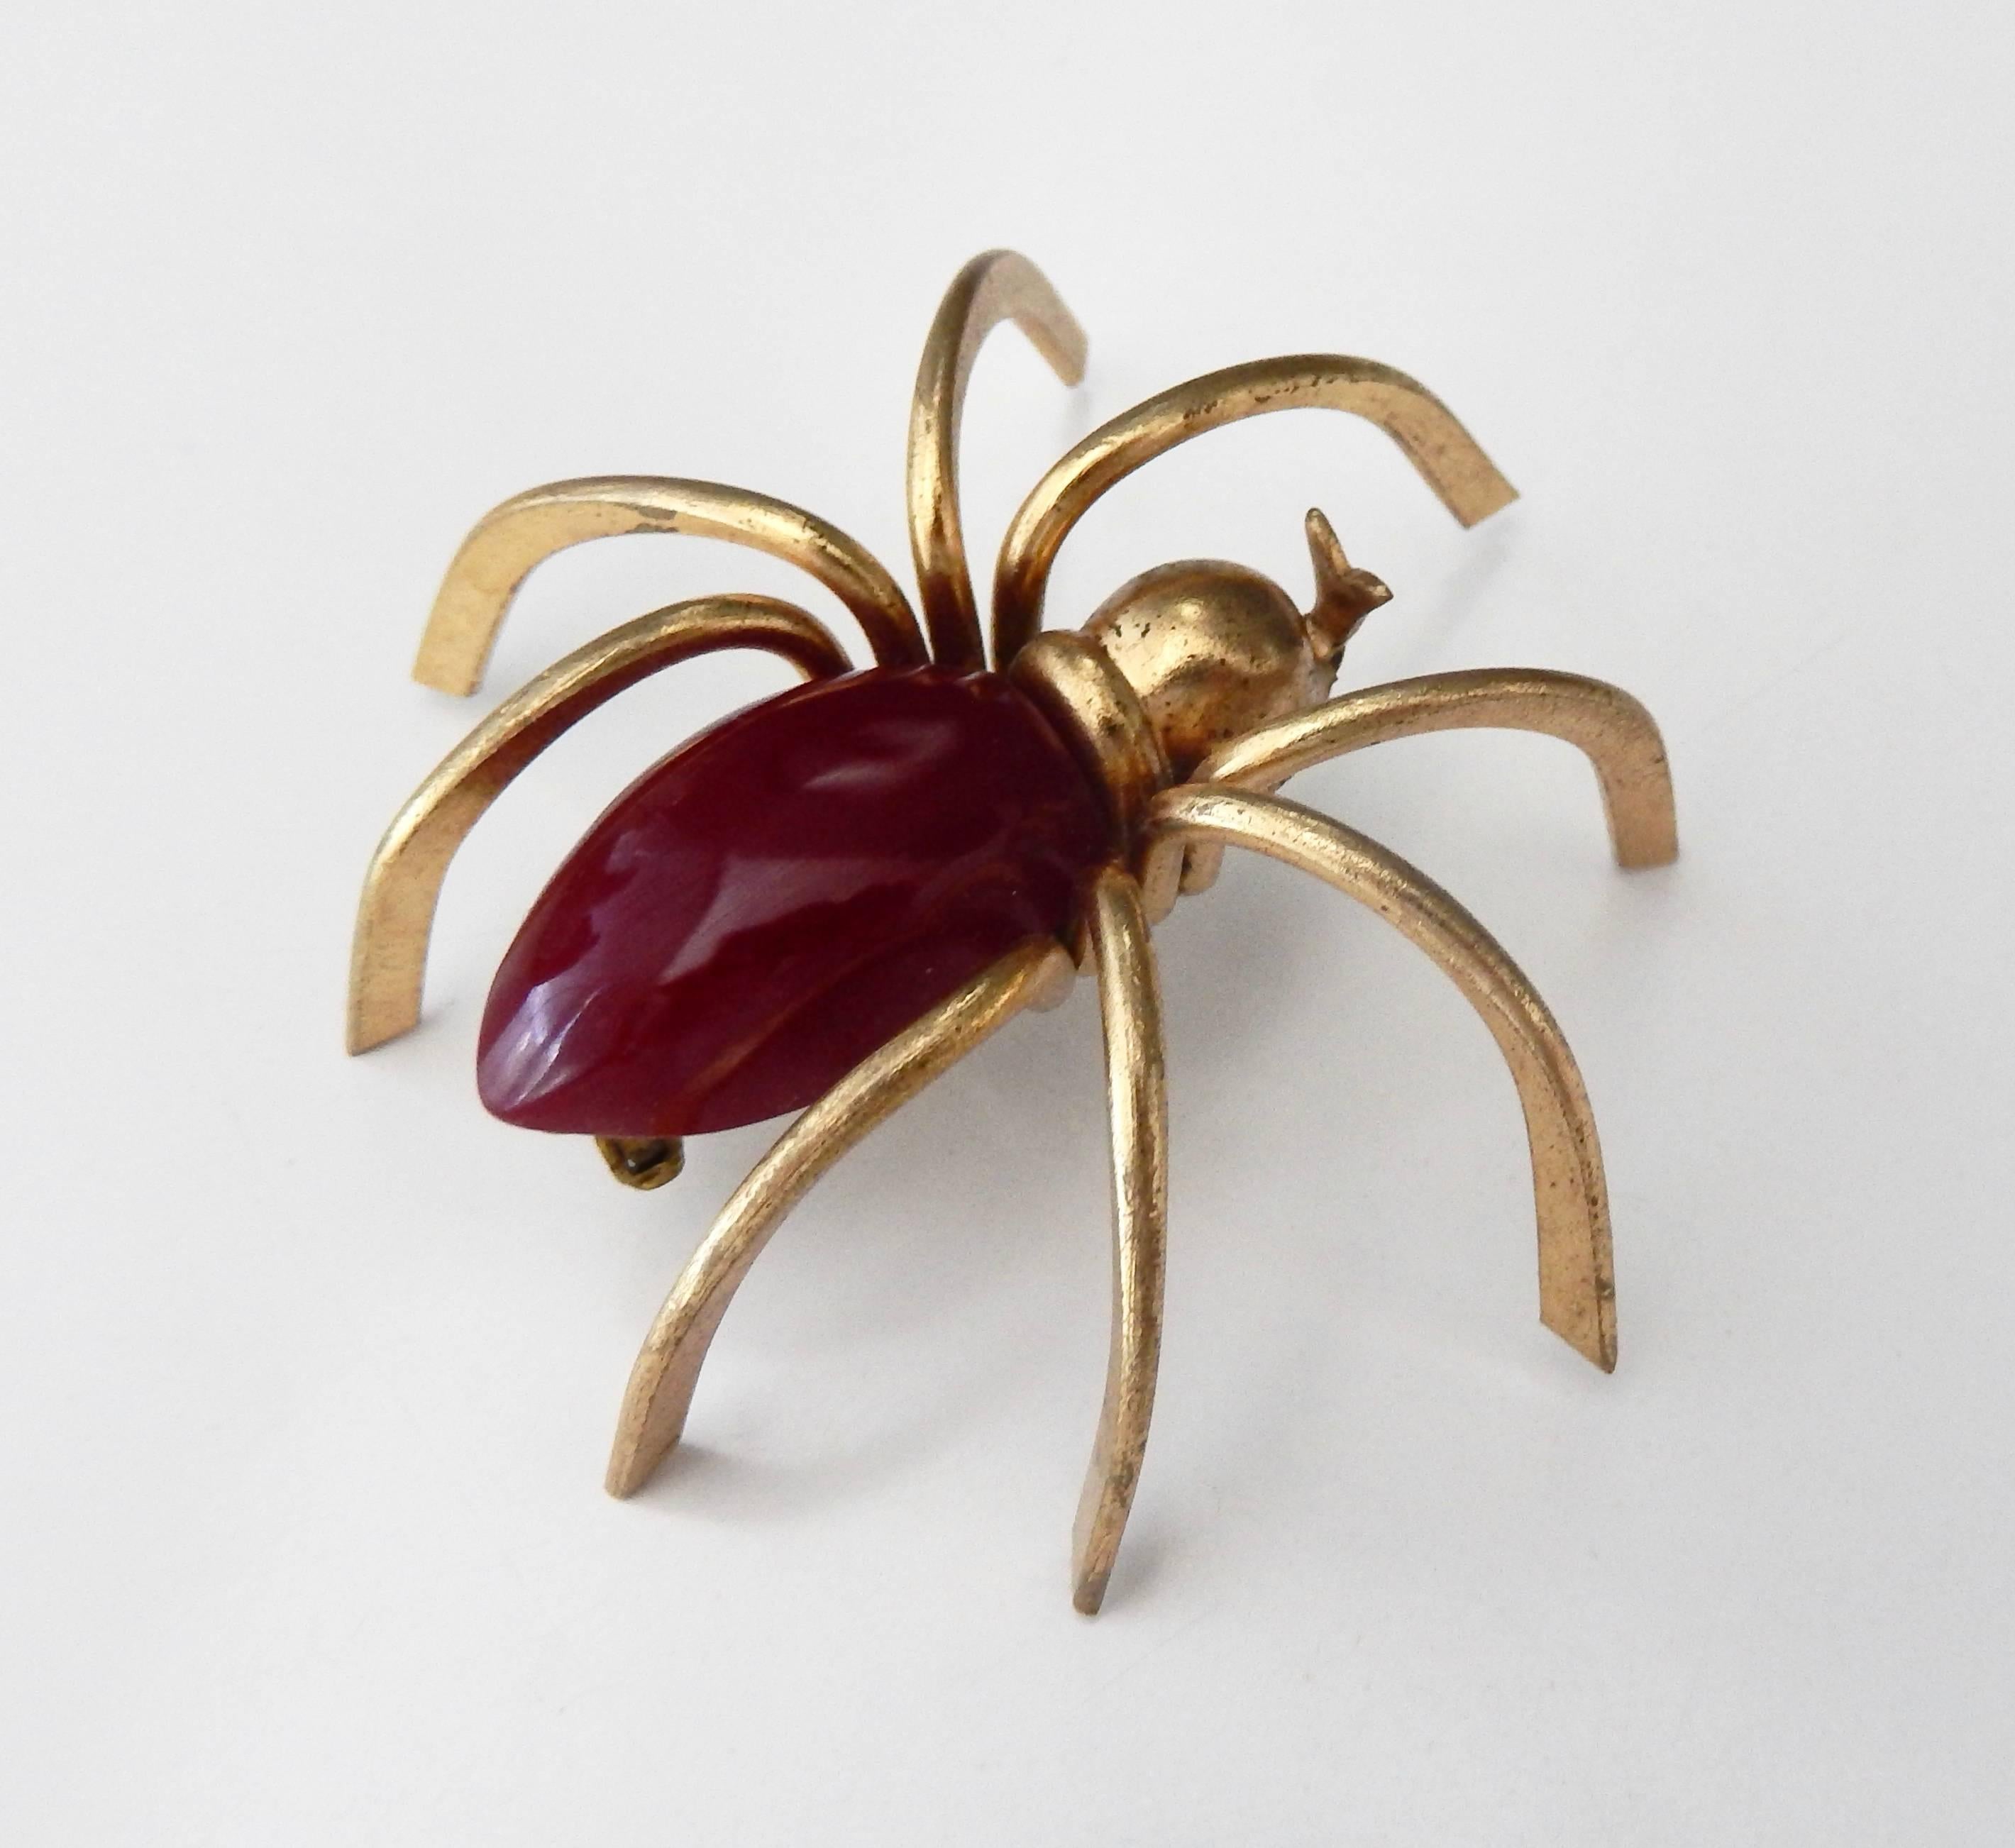 A whimsical three-dimensional gilt metal spider pin with a burgundy red bakelite body from the 1930s.  In very good condition.  A classic, scarce example of American Art Deco costume jewelry.  (Note that in bright sunlight the bakelite takes on a